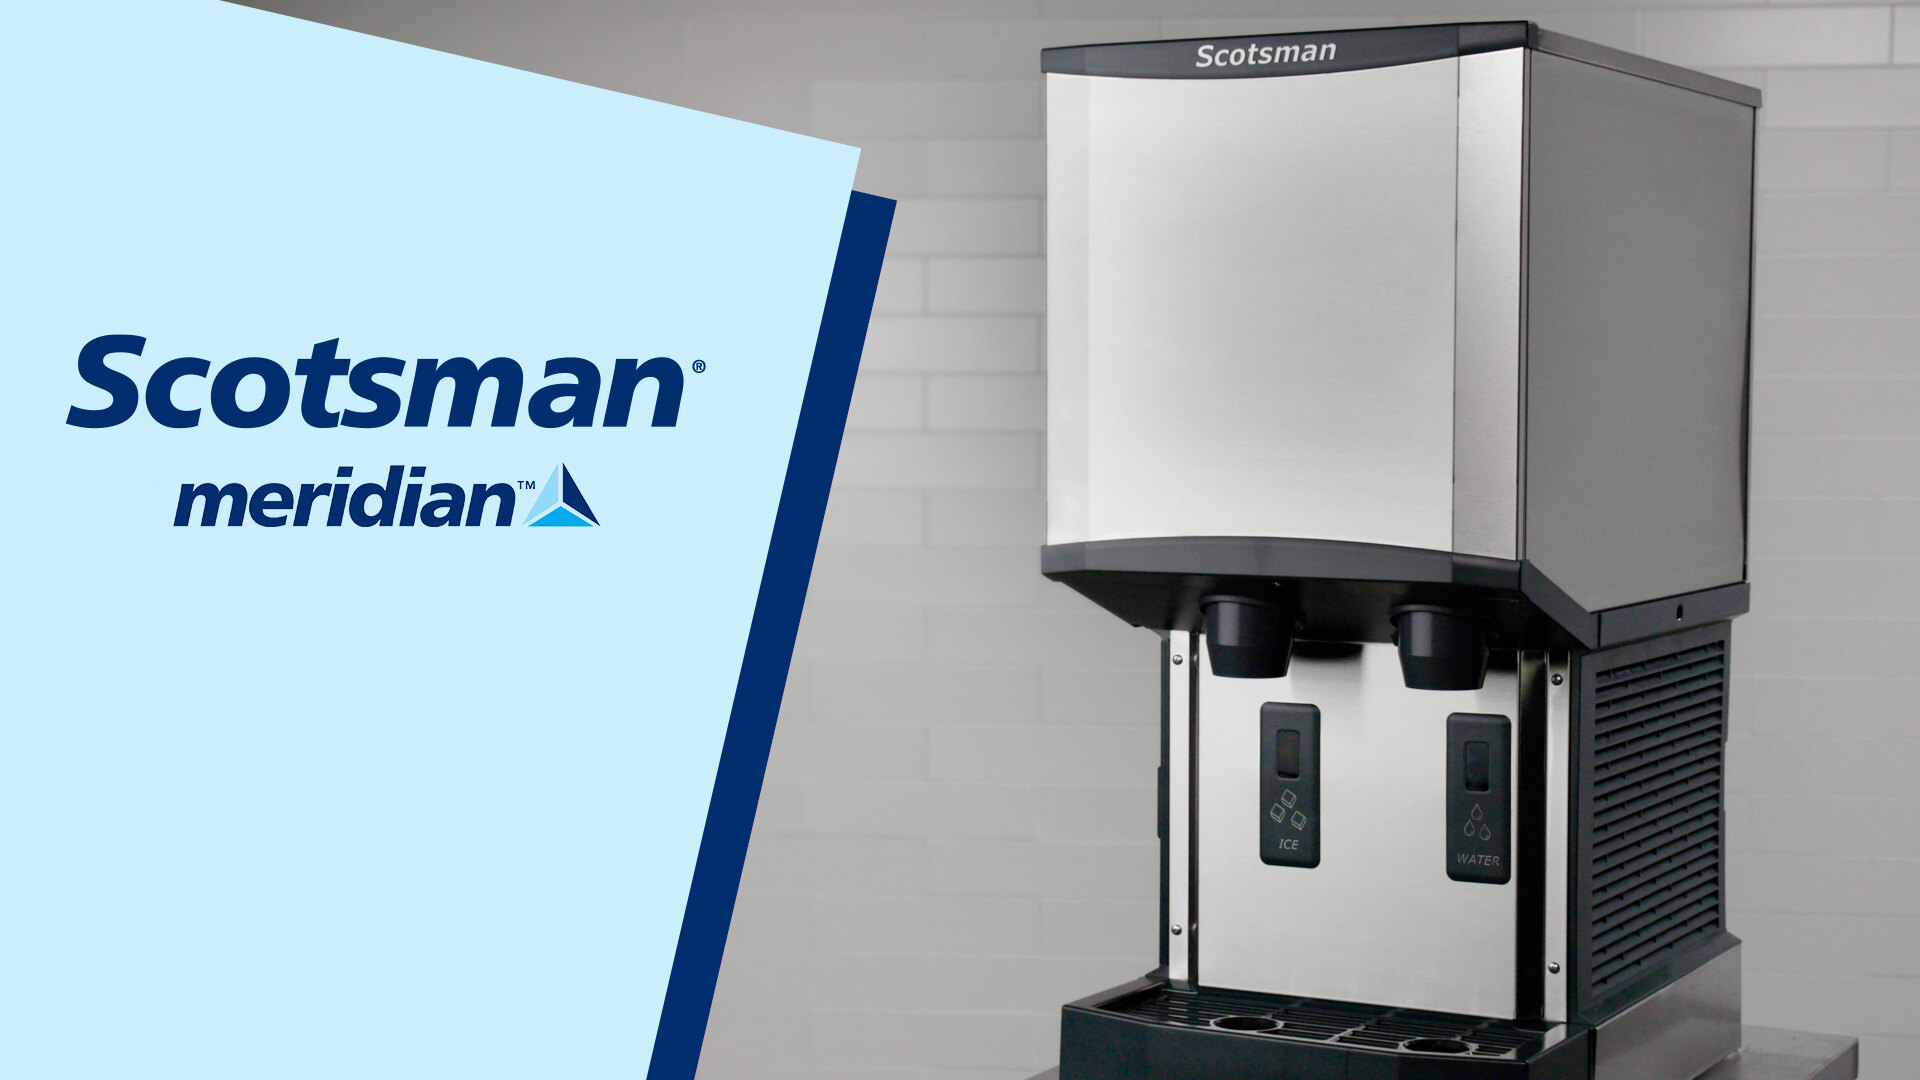 Scotsman HID525A-1 500 lb Countertop Nugget Ice & Water Dispenser for  Commercial Ice Machines - 25 lb Storage, Cup Fill, 115v, Max. 500 Lbs./Day,  Stainless Steel - Yahoo Shopping